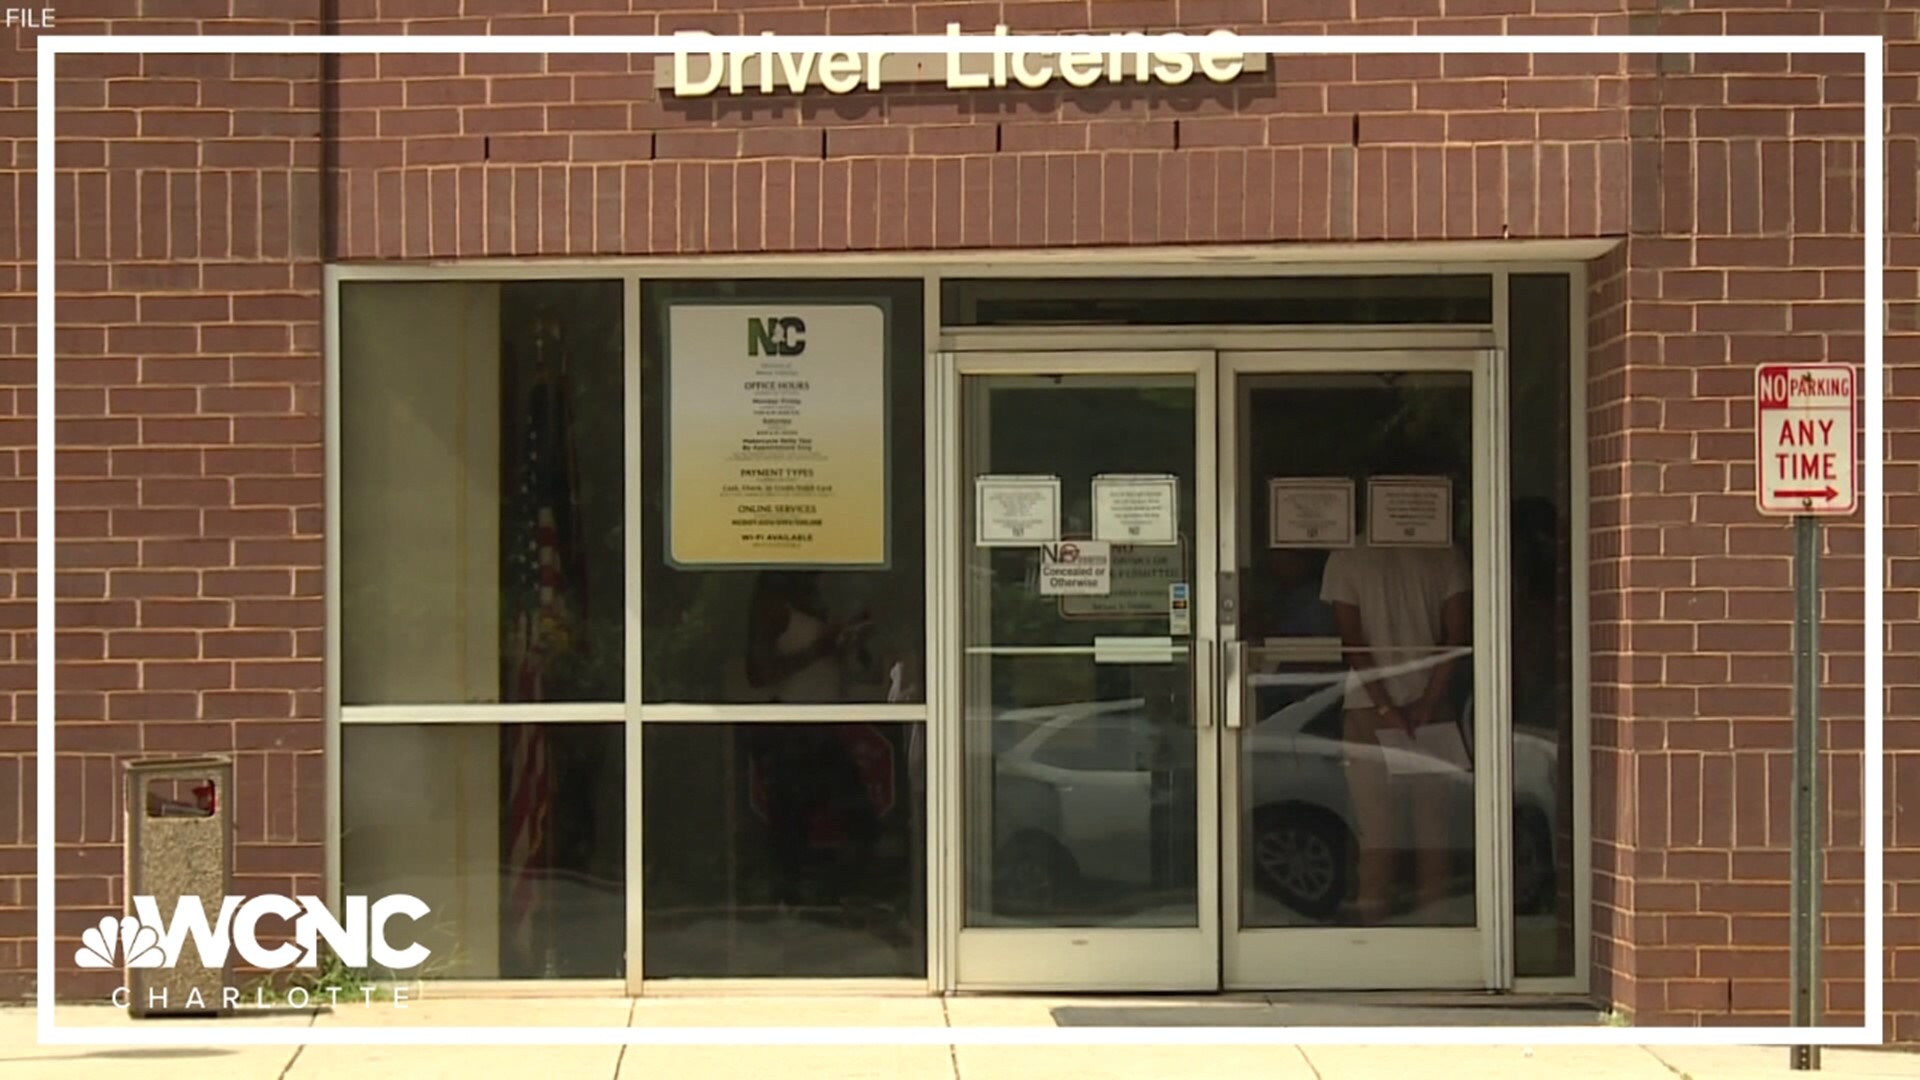 A nationwide DMV outage that impacted Driver License and Title services has been fixed. The outage was caused by a loss in cloud connectivity.